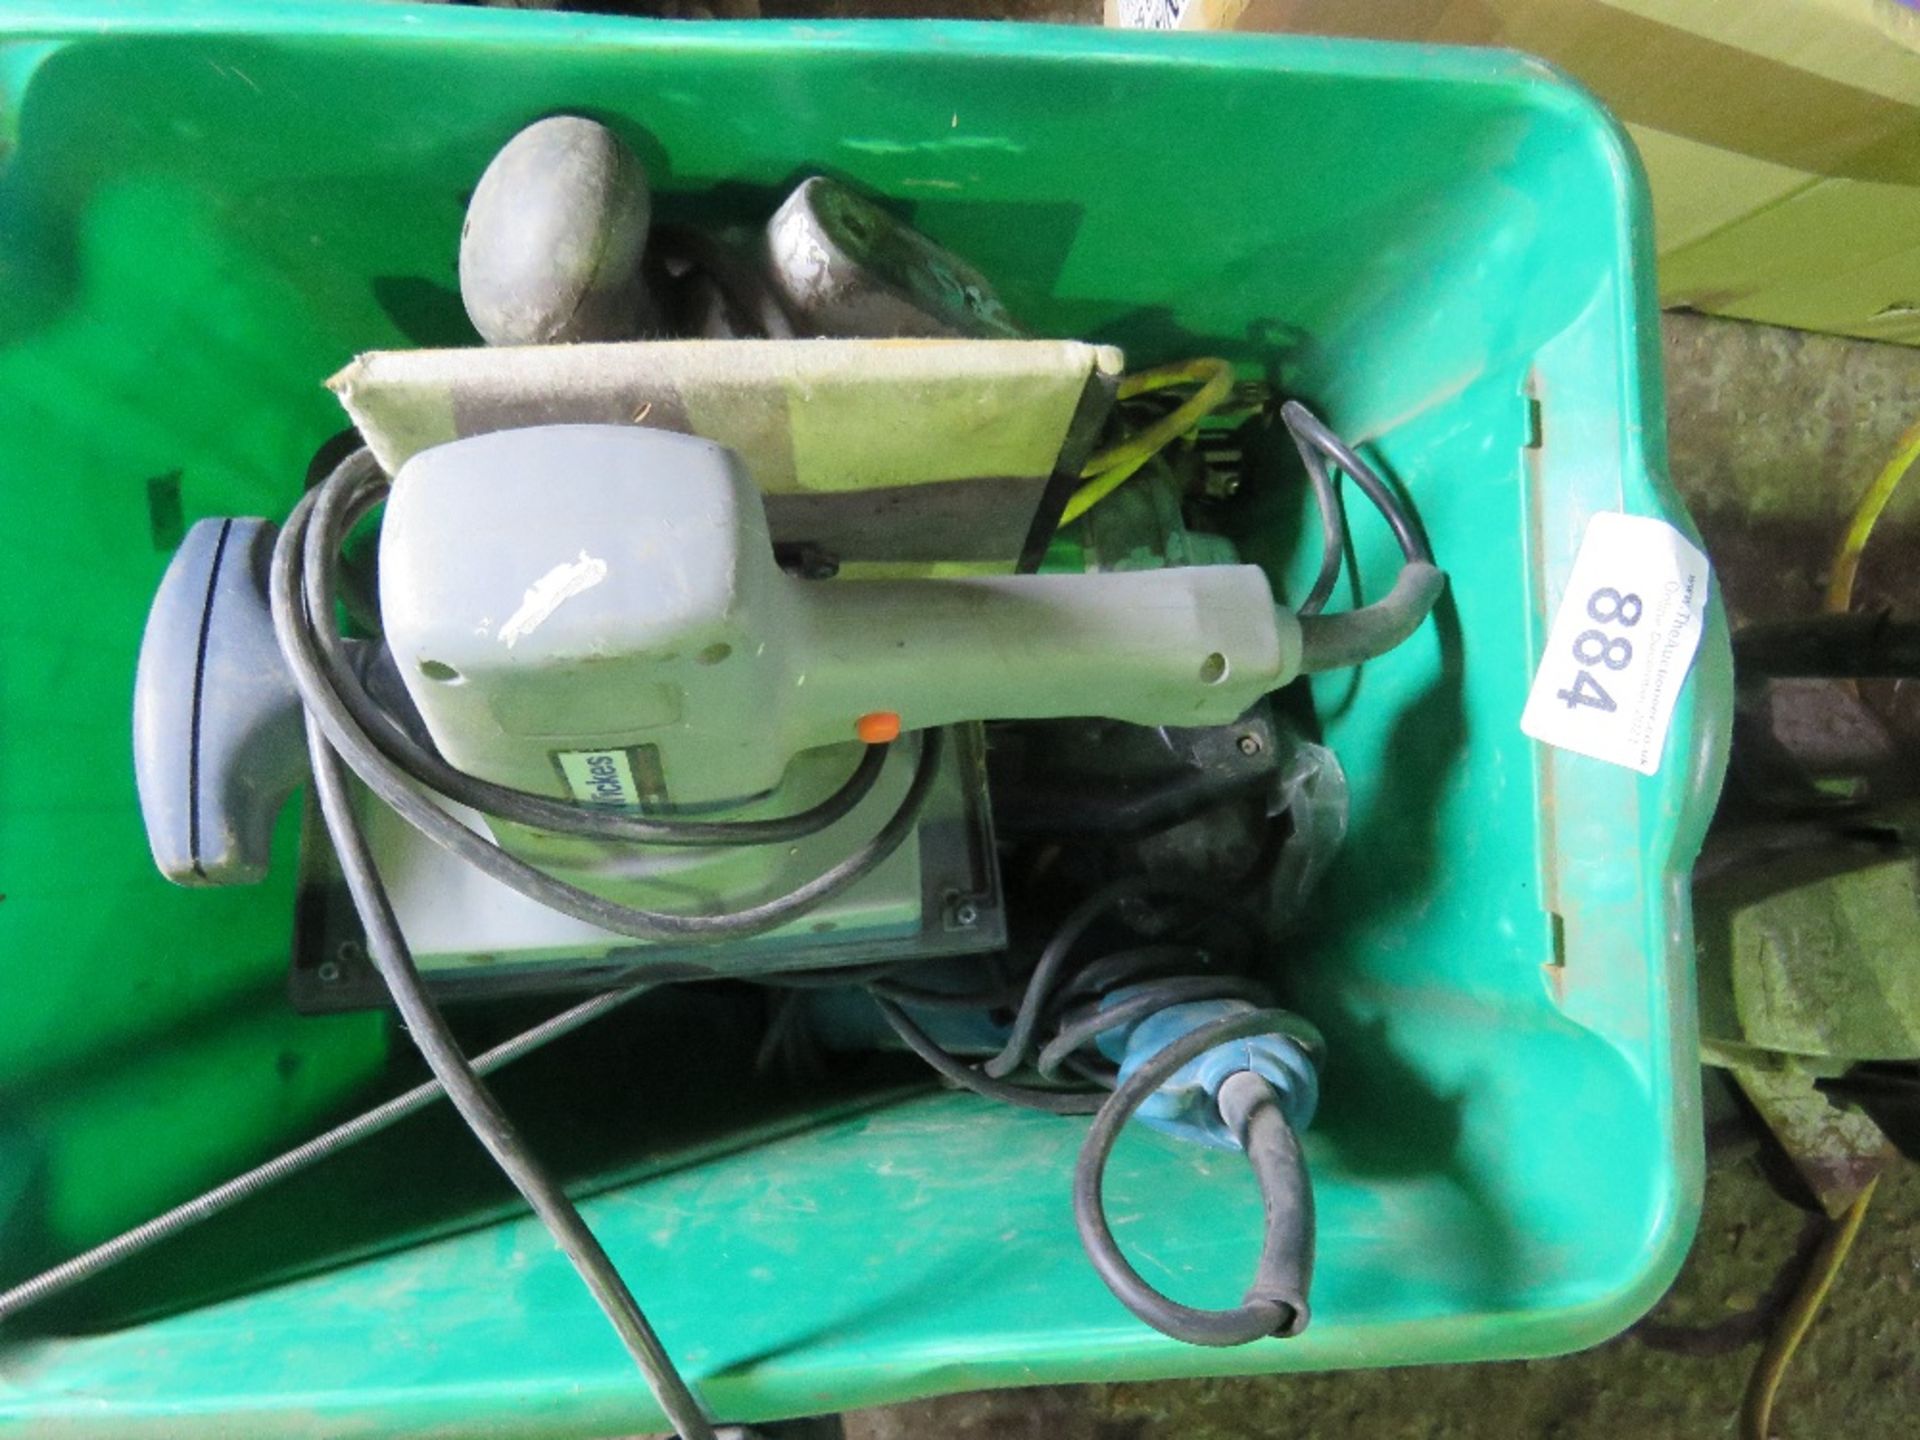 4 X POWER TOOLS: NIBBLER, DRIVER, JIGSAW, SANDER. SOLD UNDER THE AUCTIONEERS MARGIN SCHEME THERFORE - Image 3 of 3